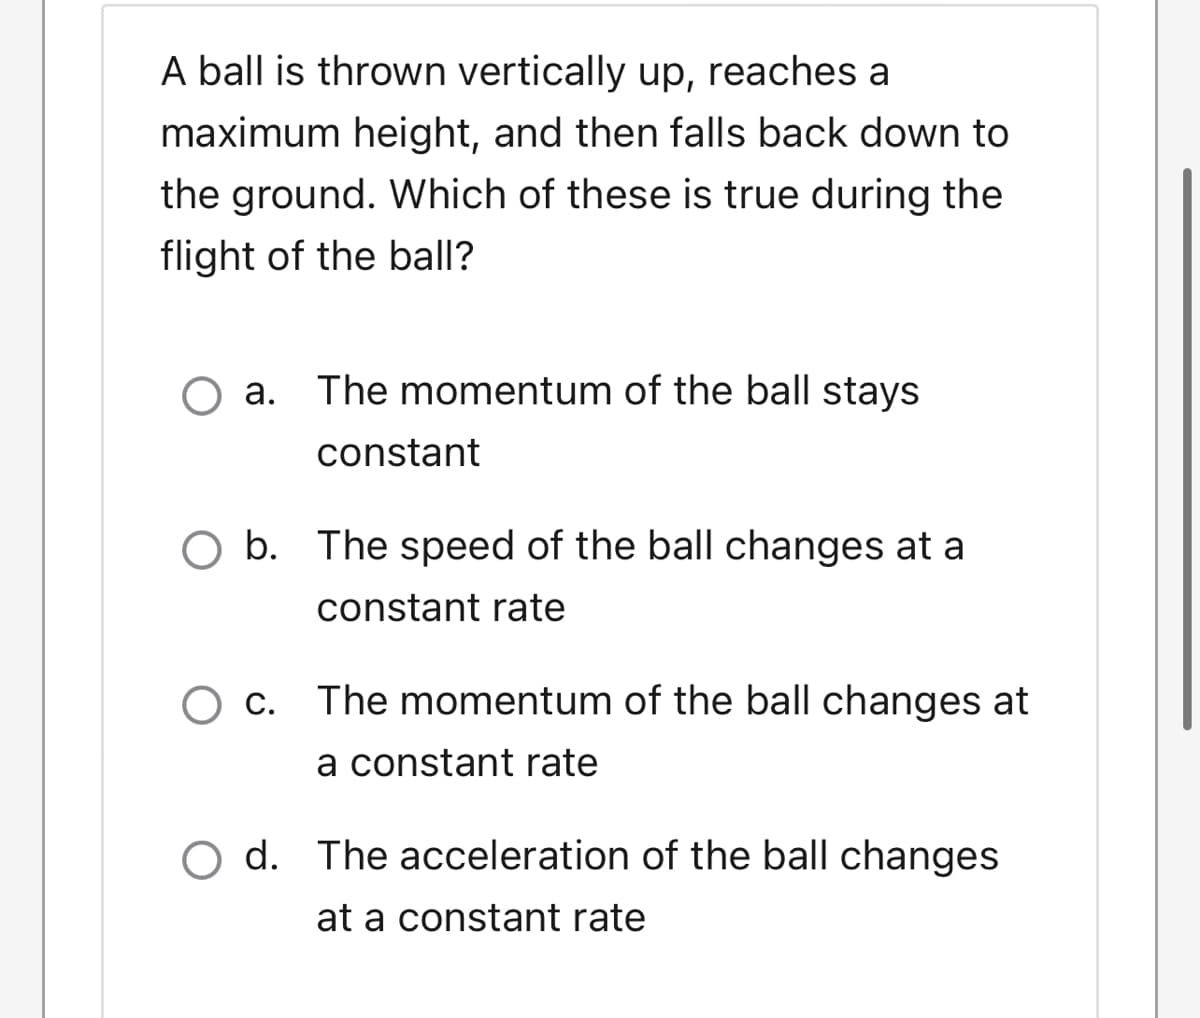 A ball is thrown vertically up, reaches a
maximum height, and then falls back down to
the ground. Which of these is true during the
flight of the ball?
O a. The momentum of the ball stays
constant
O b. The speed of the ball changes at a
constant rate
O c. The momentum of the ball changes at
a constant rate
O d. The acceleration of the ball changes
at a constant rate
